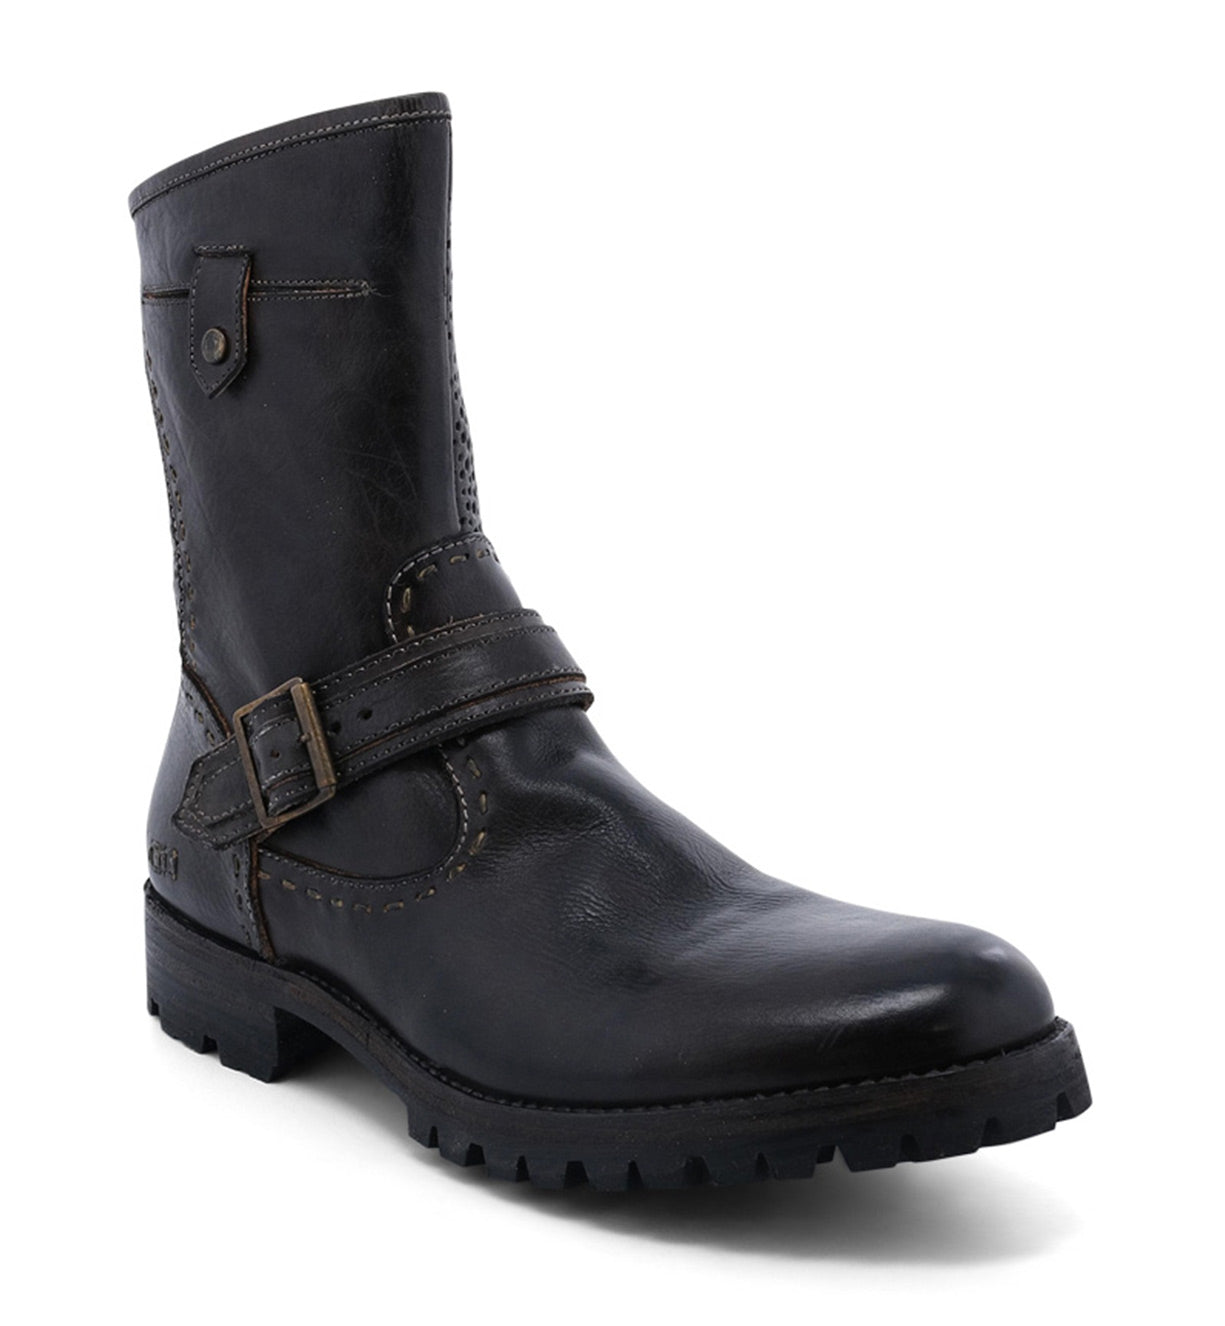 Men's black leather boots with Brando buckles and Bed Stu buckles.